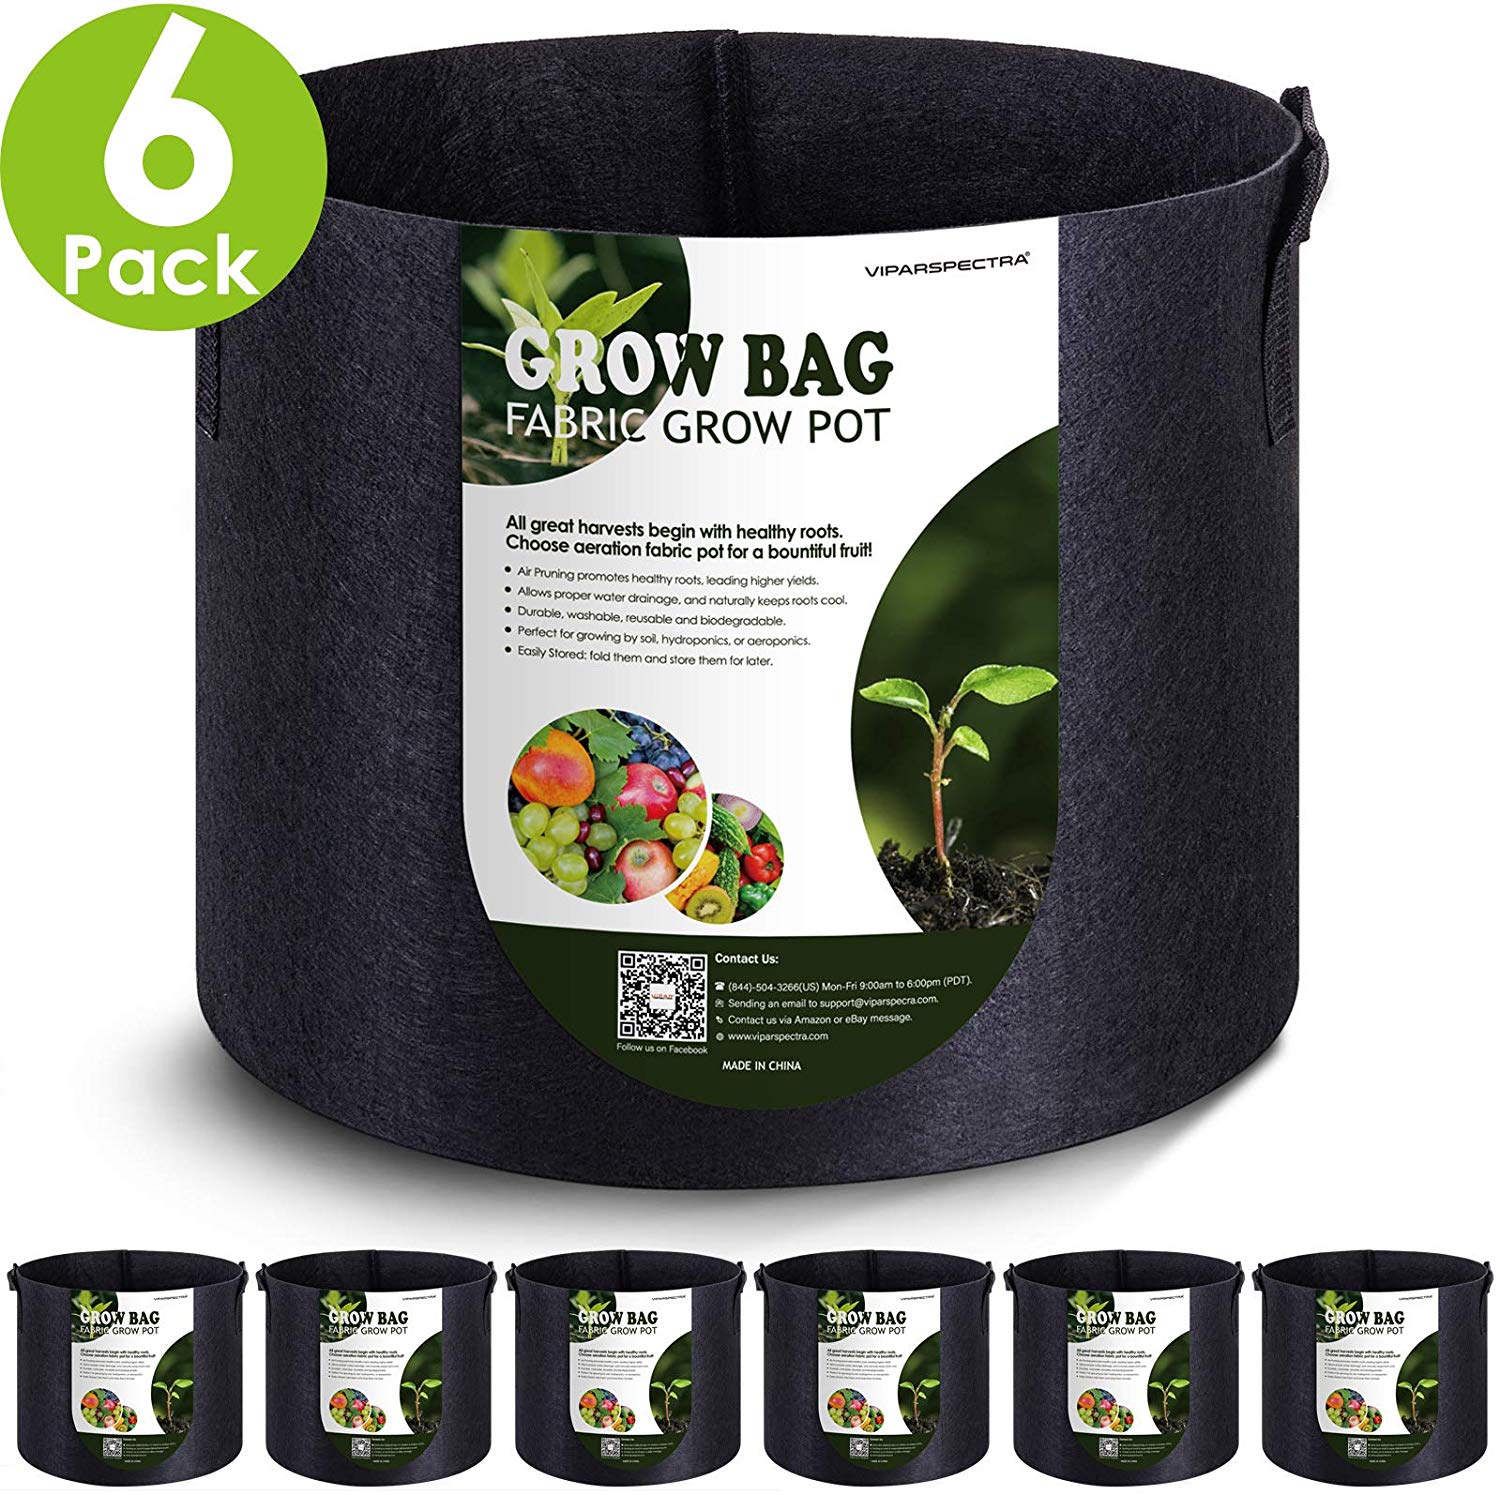 HONEST OUTFITTERS 5-Pack 10 Gallon Smart Grow Bags for Potato/Plant Container/Aeration Fabric Pots with Handles Black 